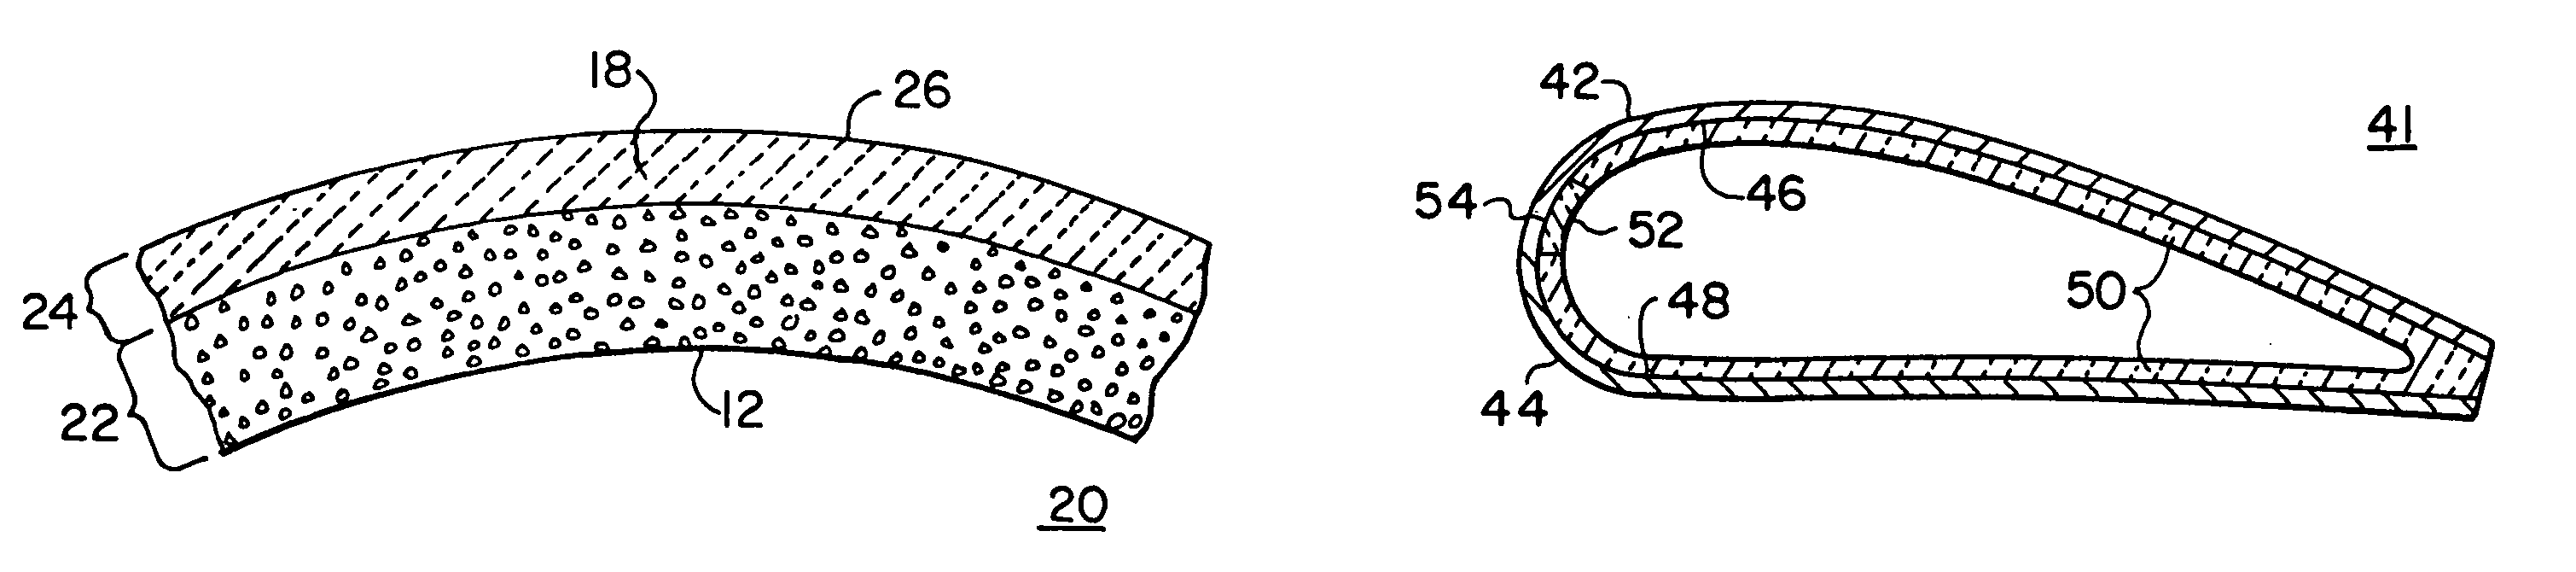 Composite structure formed by CMC-on-insulation process